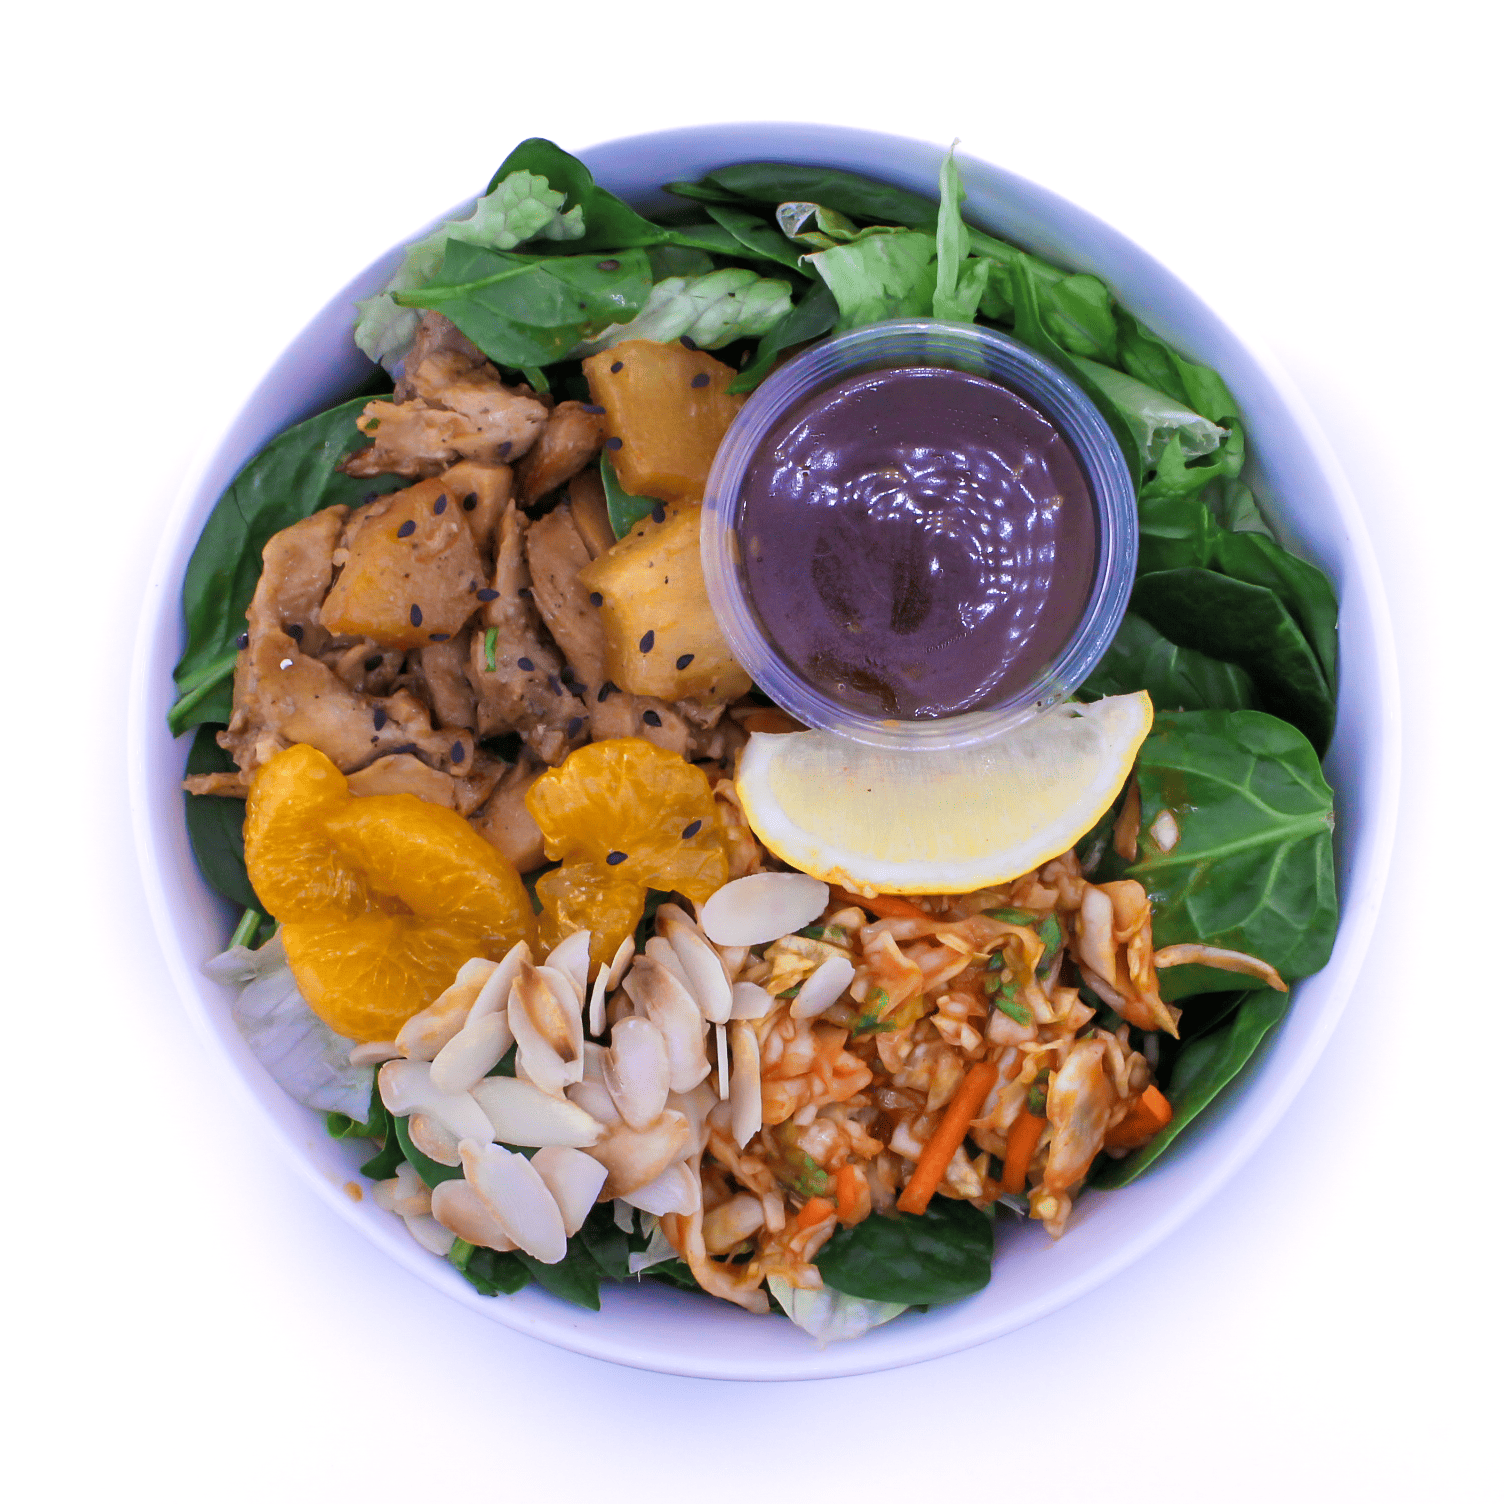 Citrus Kick - Teriyaki glazed chicken and pineapples, mixed greens, mandarin oranges, spicy slaw, almonds, black sesame seeds, sesame dressing - Contains Nuts